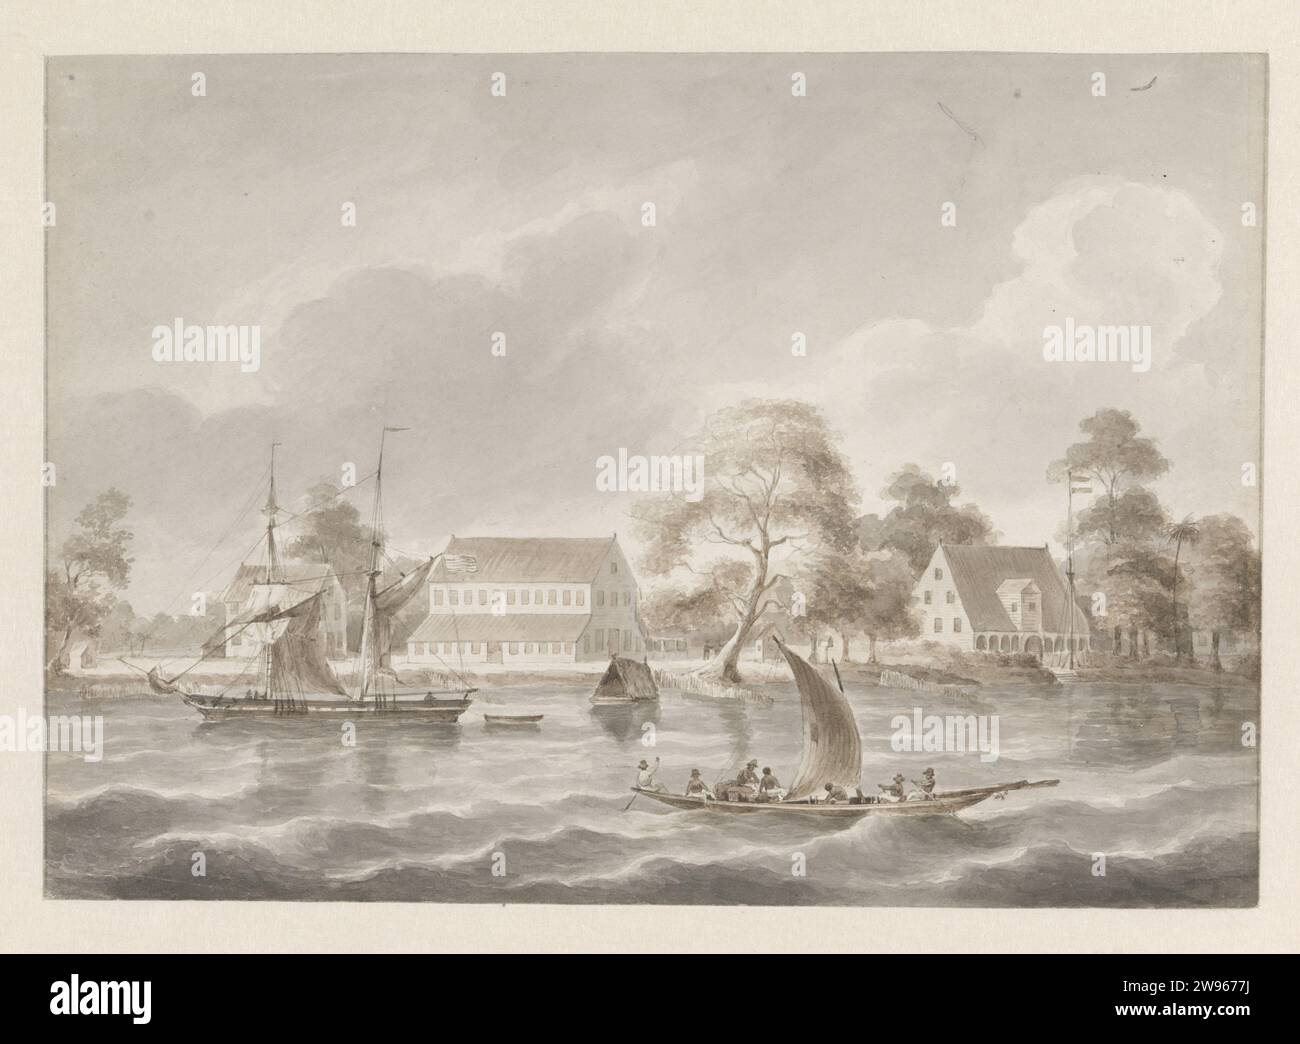 Plantation Jagtlust on the Suriname River, After 1849 - Before 1851 drawing View of a plantation, probably Jagtlust plantation, from the other side of the Suriname river. On the river, a schooner with dingy, a pondo and an open sail sloop with seven men and luggage on board from left to right. For one of the plantation buildings is a landing place with a flagpole with the Dutch flag in top. Paramaribo paper. ink pen / brush plantation Suriname. Plantage chasing lust Stock Photo